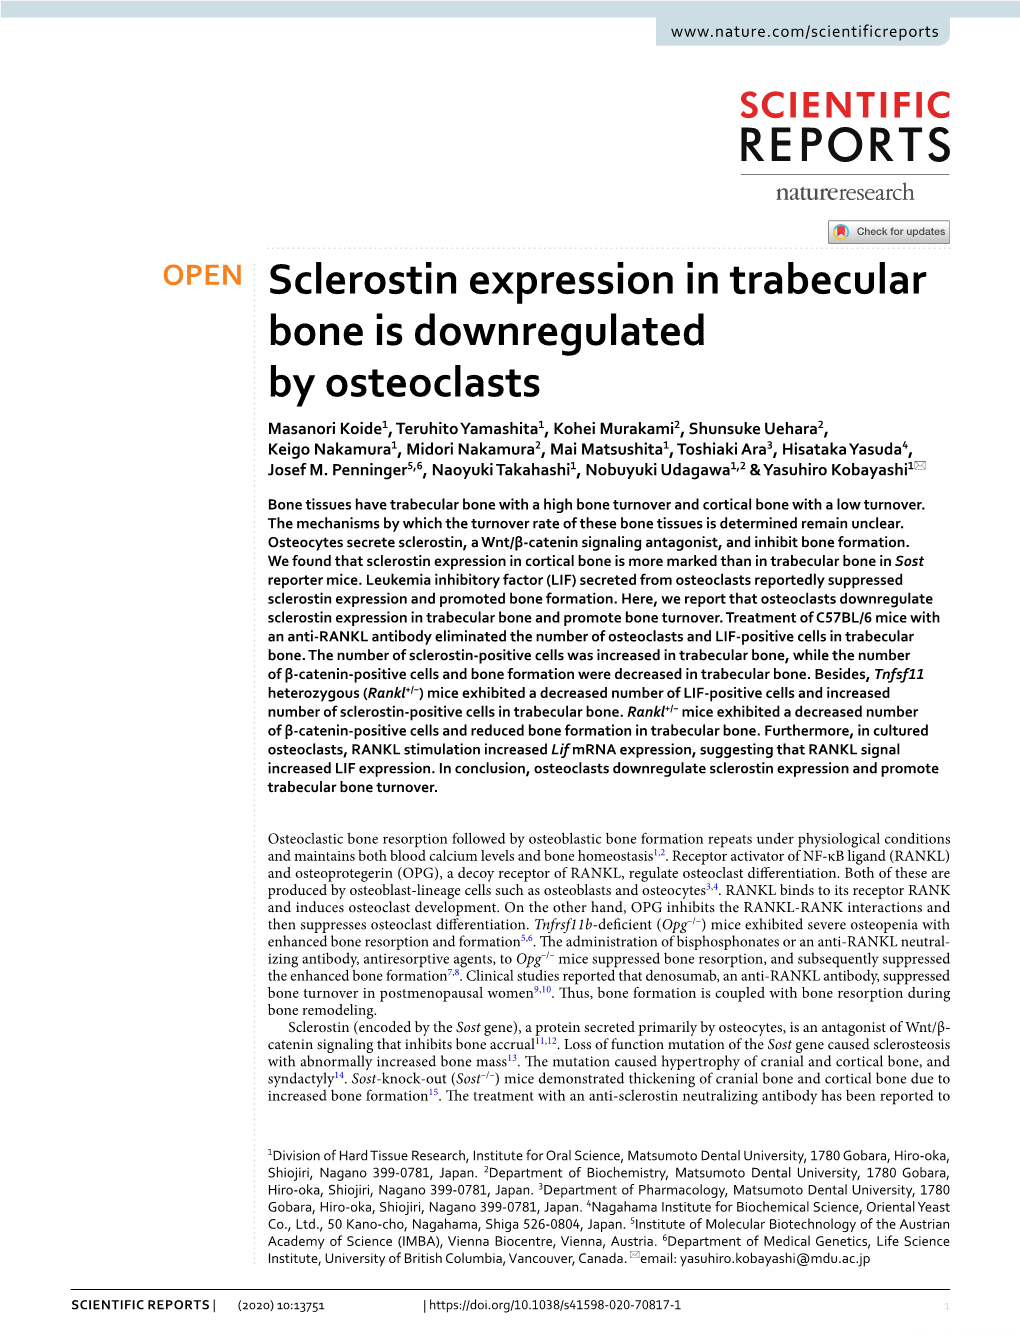 Sclerostin Expression in Trabecular Bone Is Downregulated by Osteoclasts